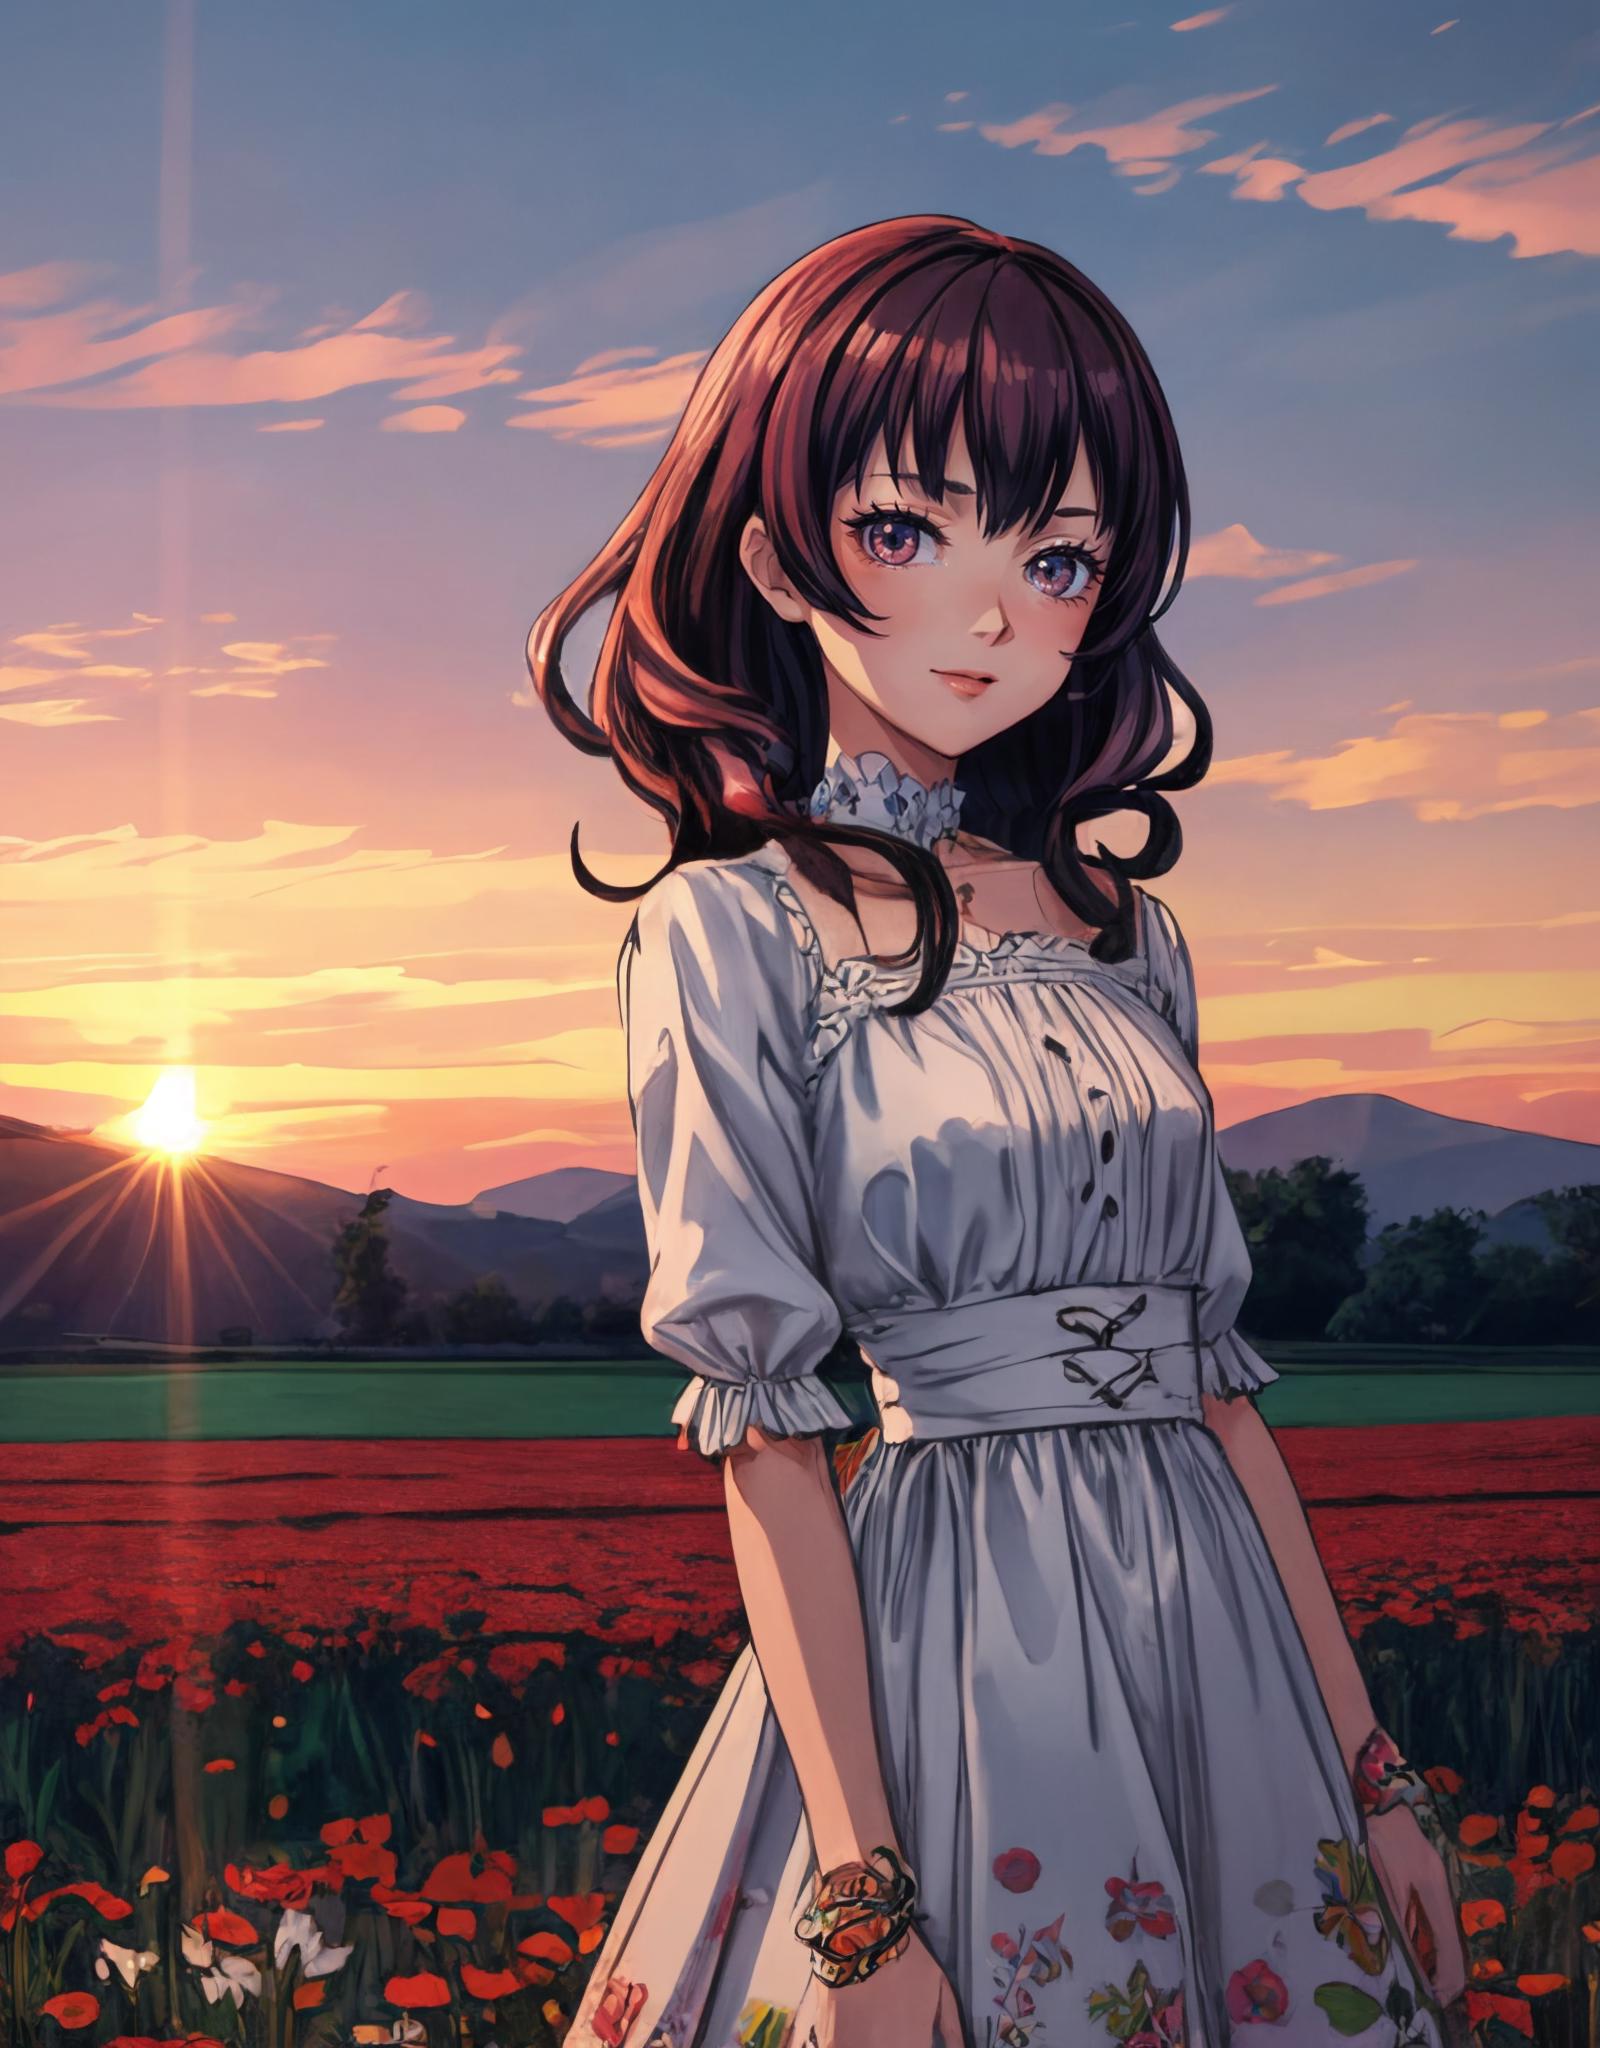 A young girl in a white dress stands in a field of flowers.